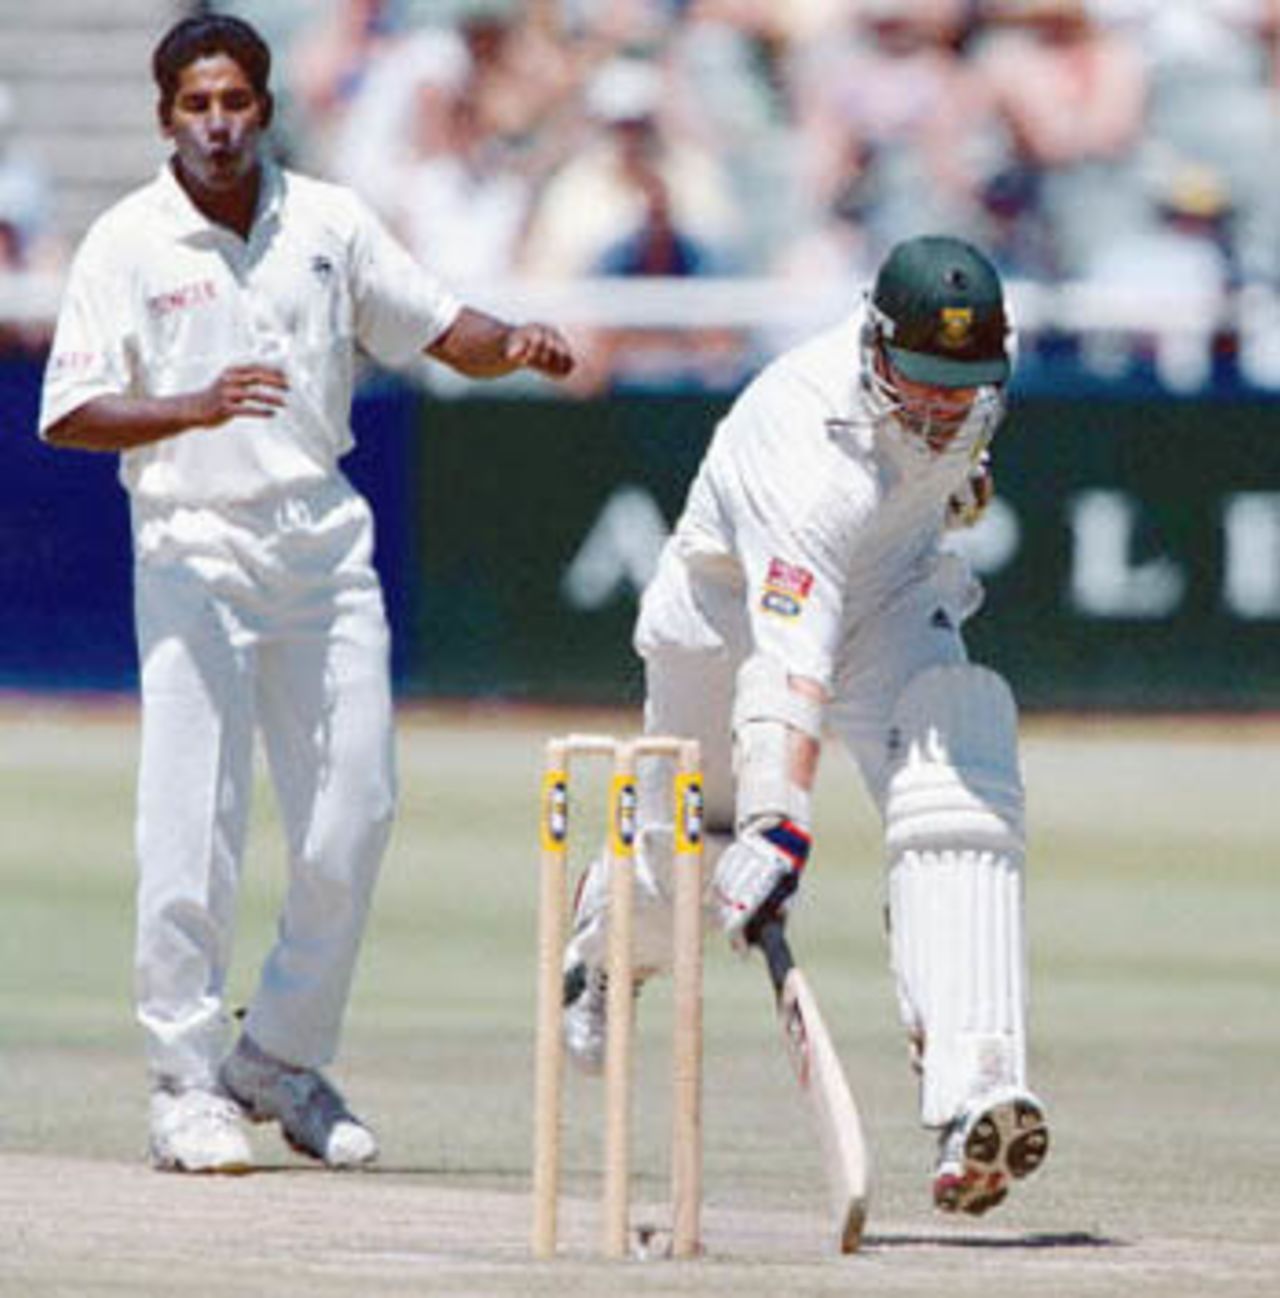 South African batsman Lance Klunser scrambles throu for a single 04 January 2001 with Chaminda Vaas looking on during the 3rd day of the 2nd test between South Africa and Sri Lanka played at the Newlands cricket ground in Cape Town.